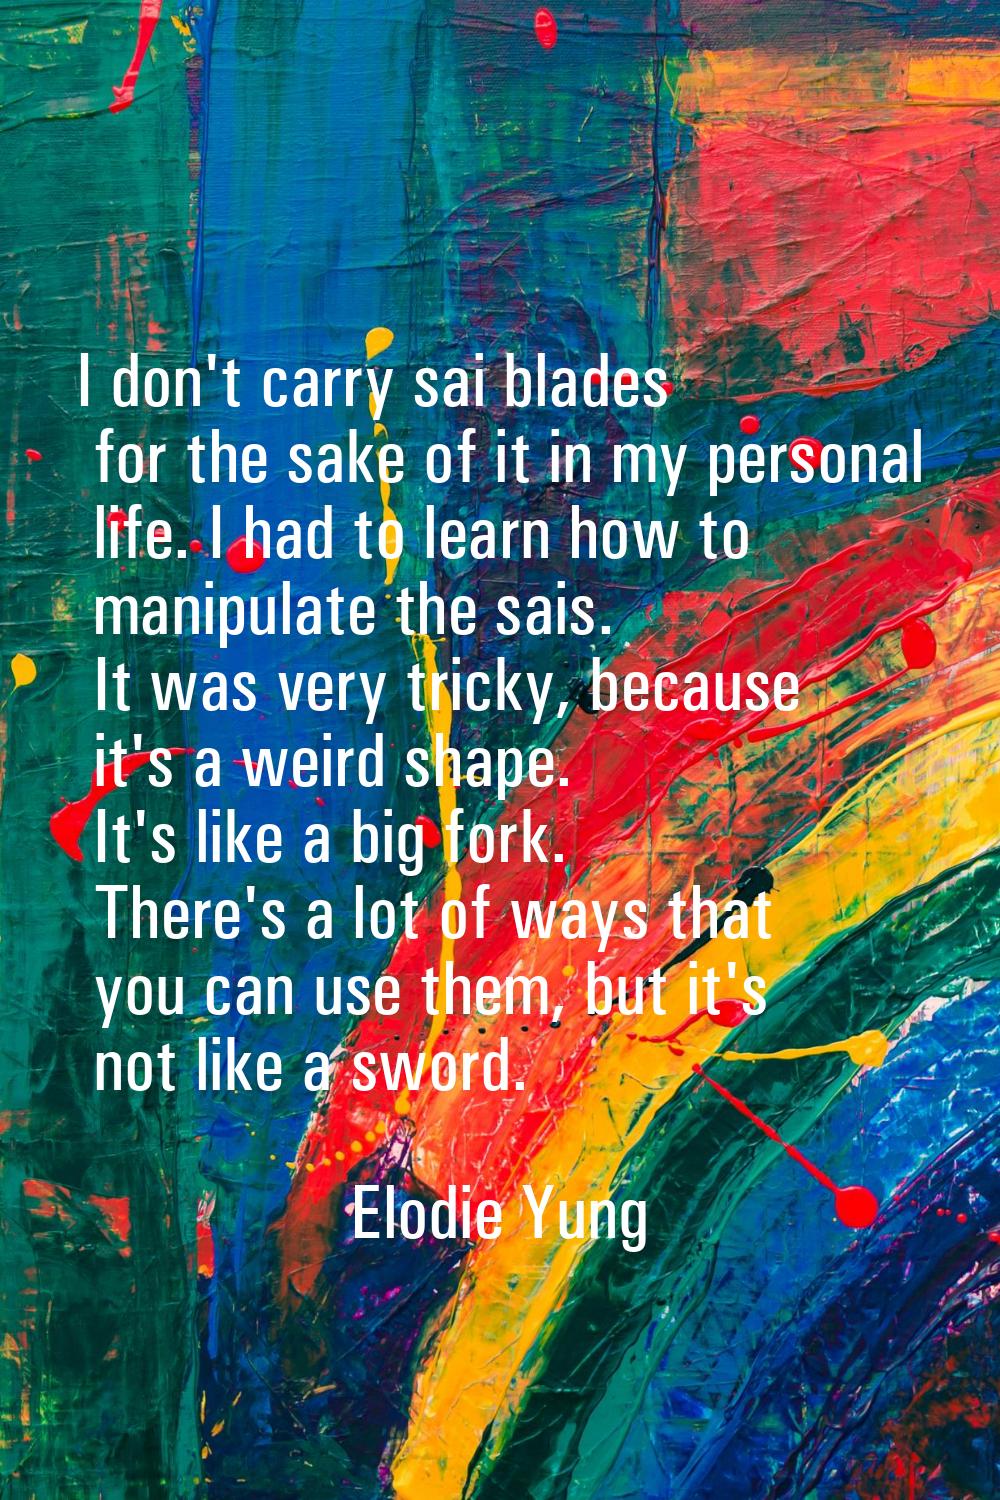 I don't carry sai blades for the sake of it in my personal life. I had to learn how to manipulate t